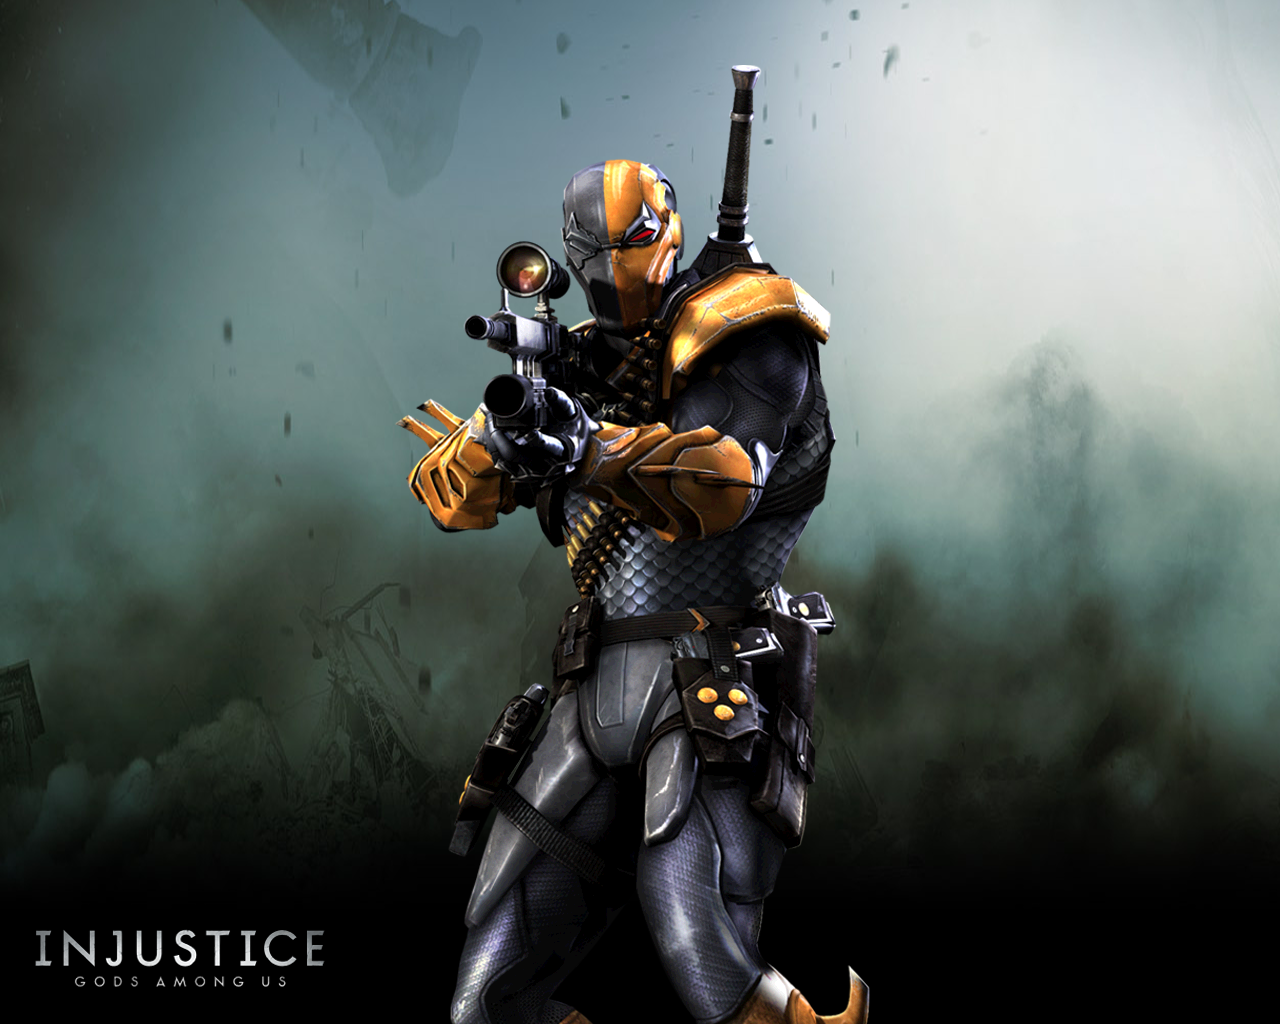 Gallery images and information Deathstroke Wallpaper Hd Injustice